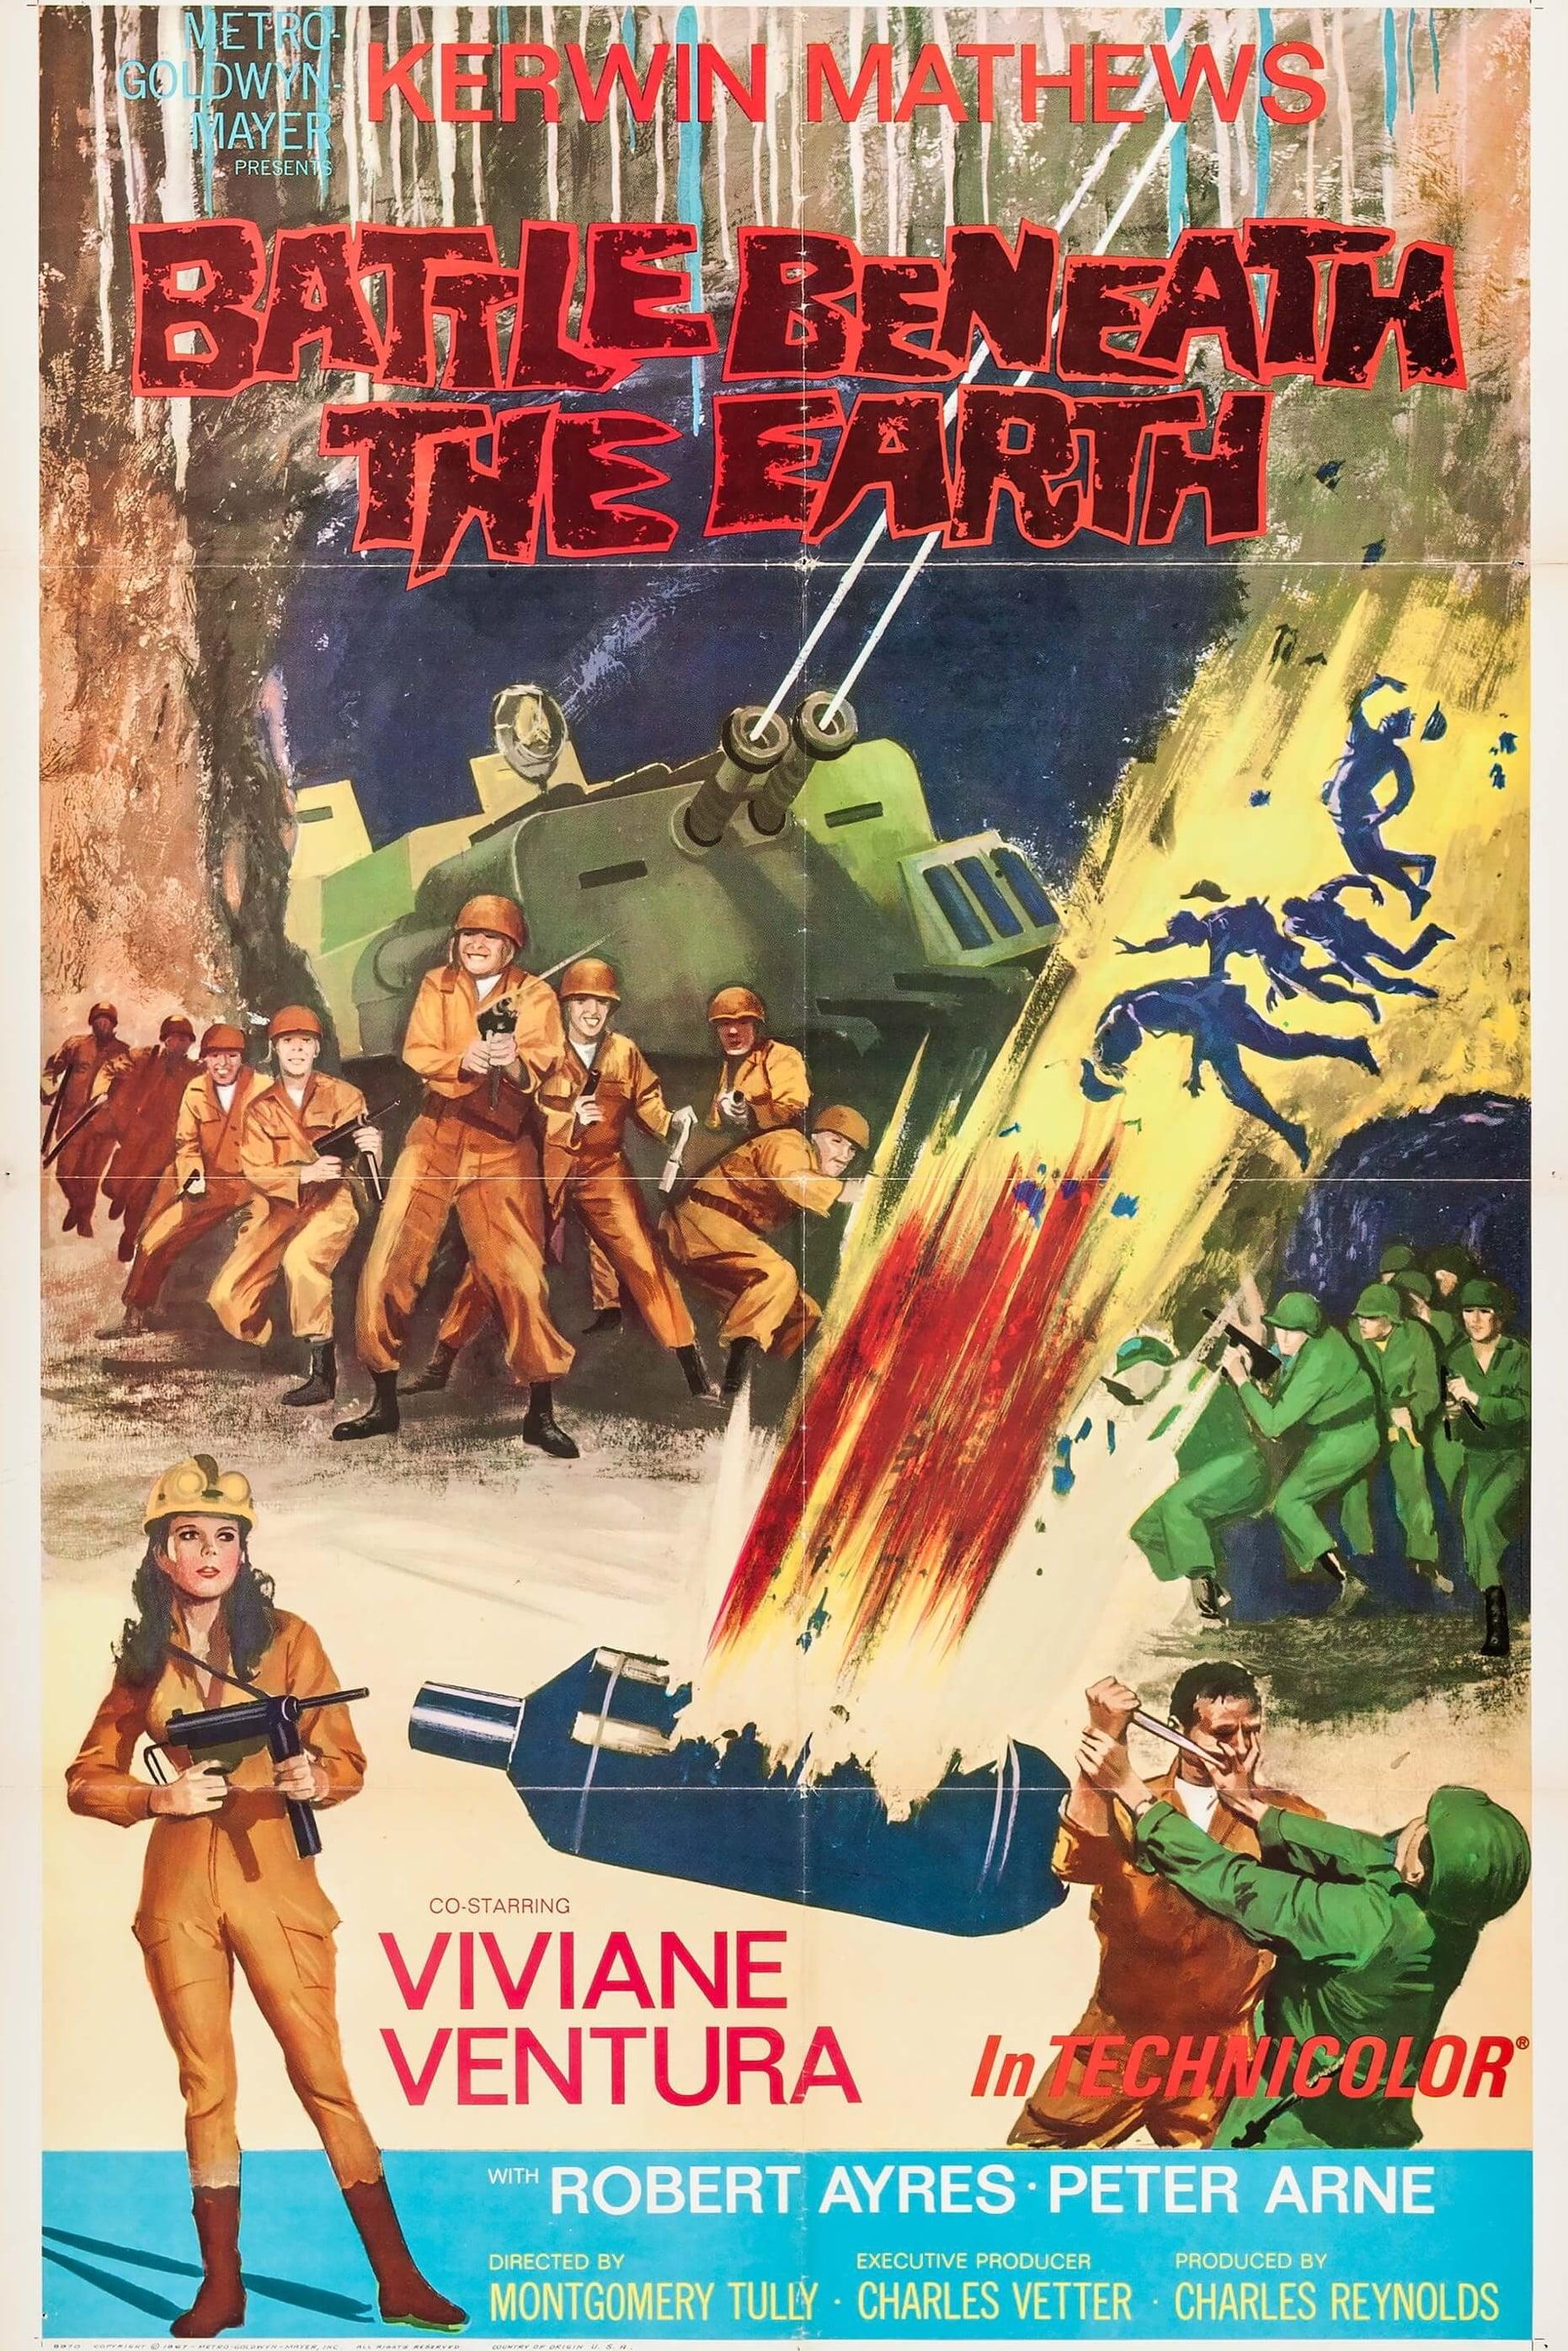 Battle Beneath the Earth poster